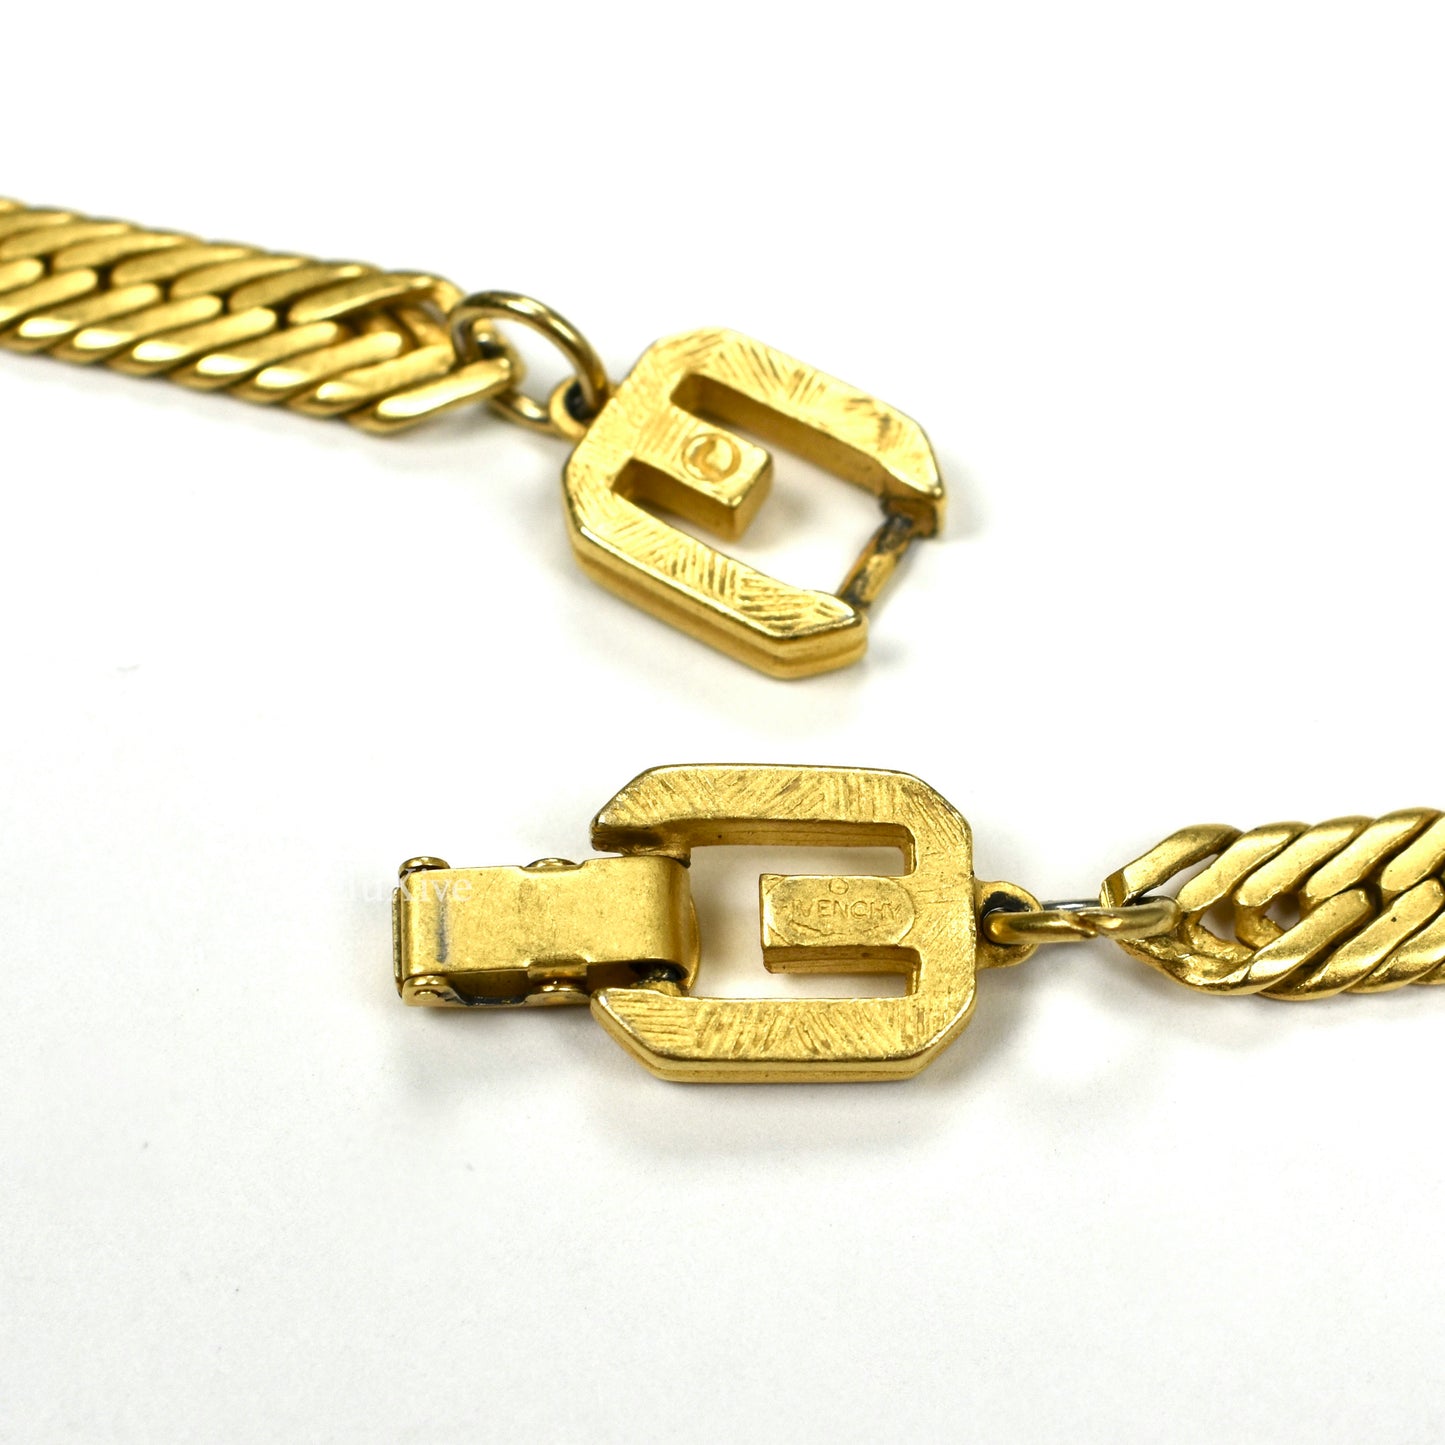 Givenchy - 24.5" Matte Gold Herringbone Chain Necklace